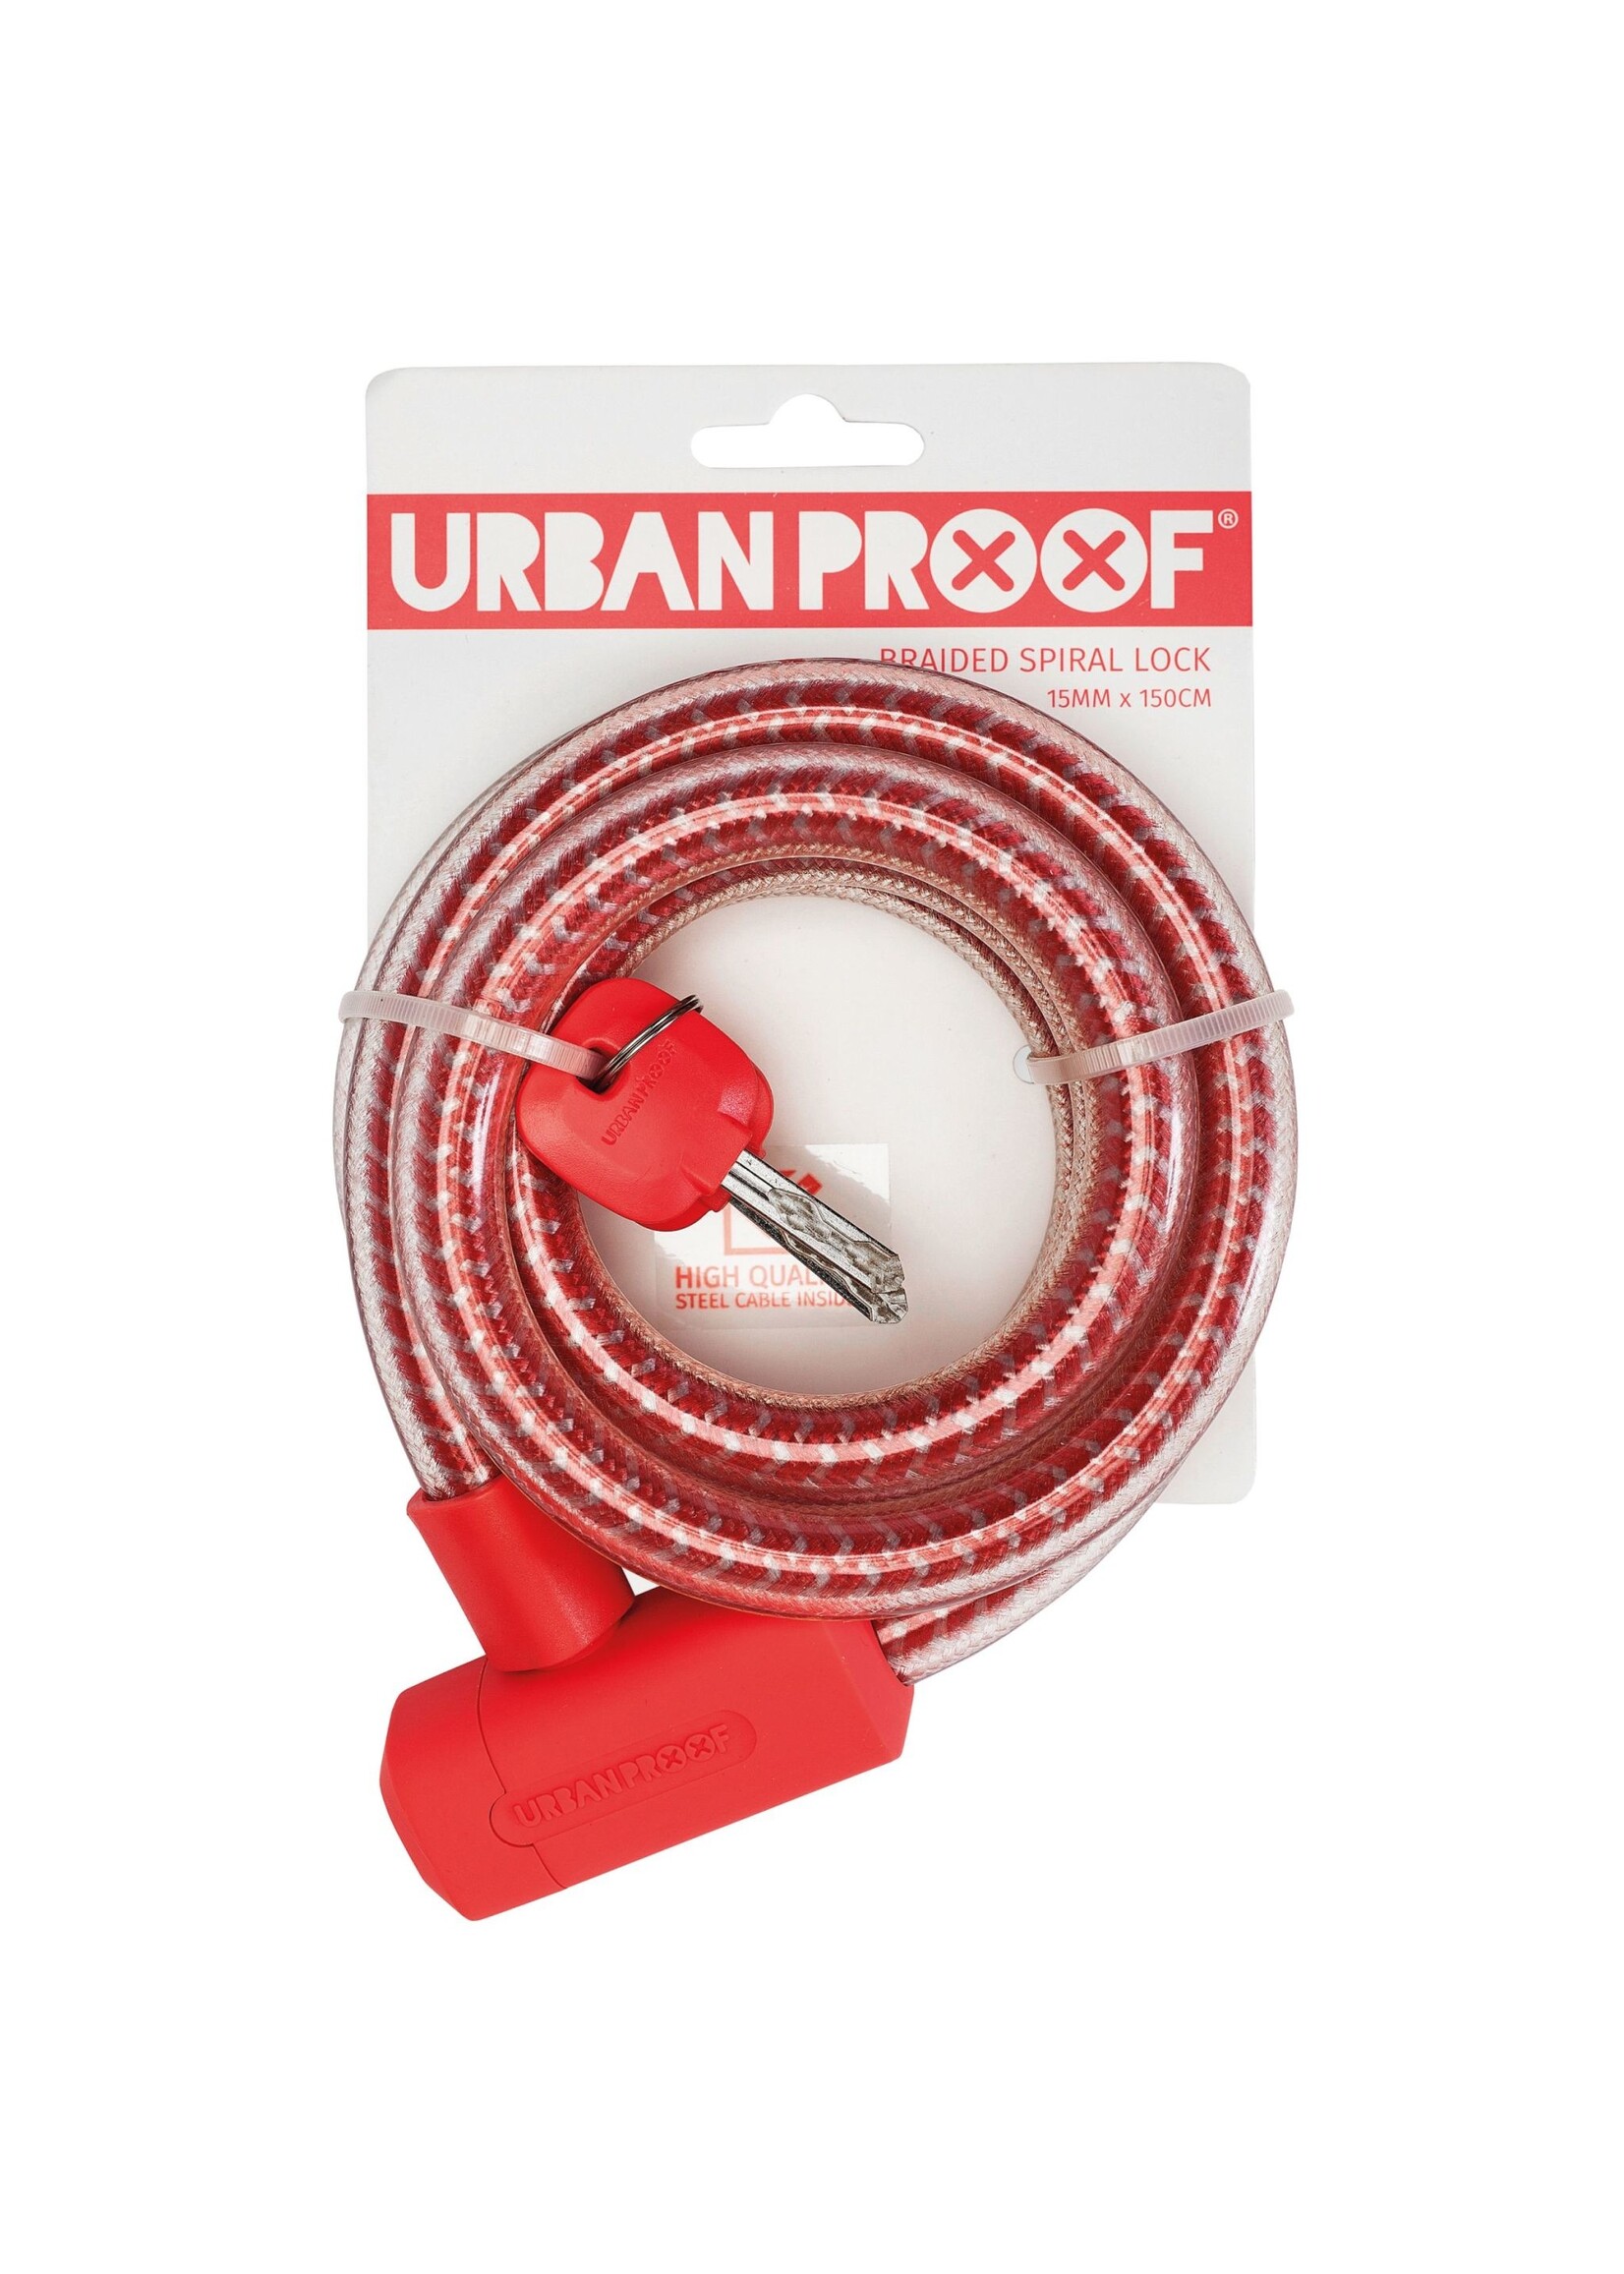 URBAN PROOF Lucchetto In Gomma Urban Proof Rosso Braided Spiral Lock 15mm x 150cm